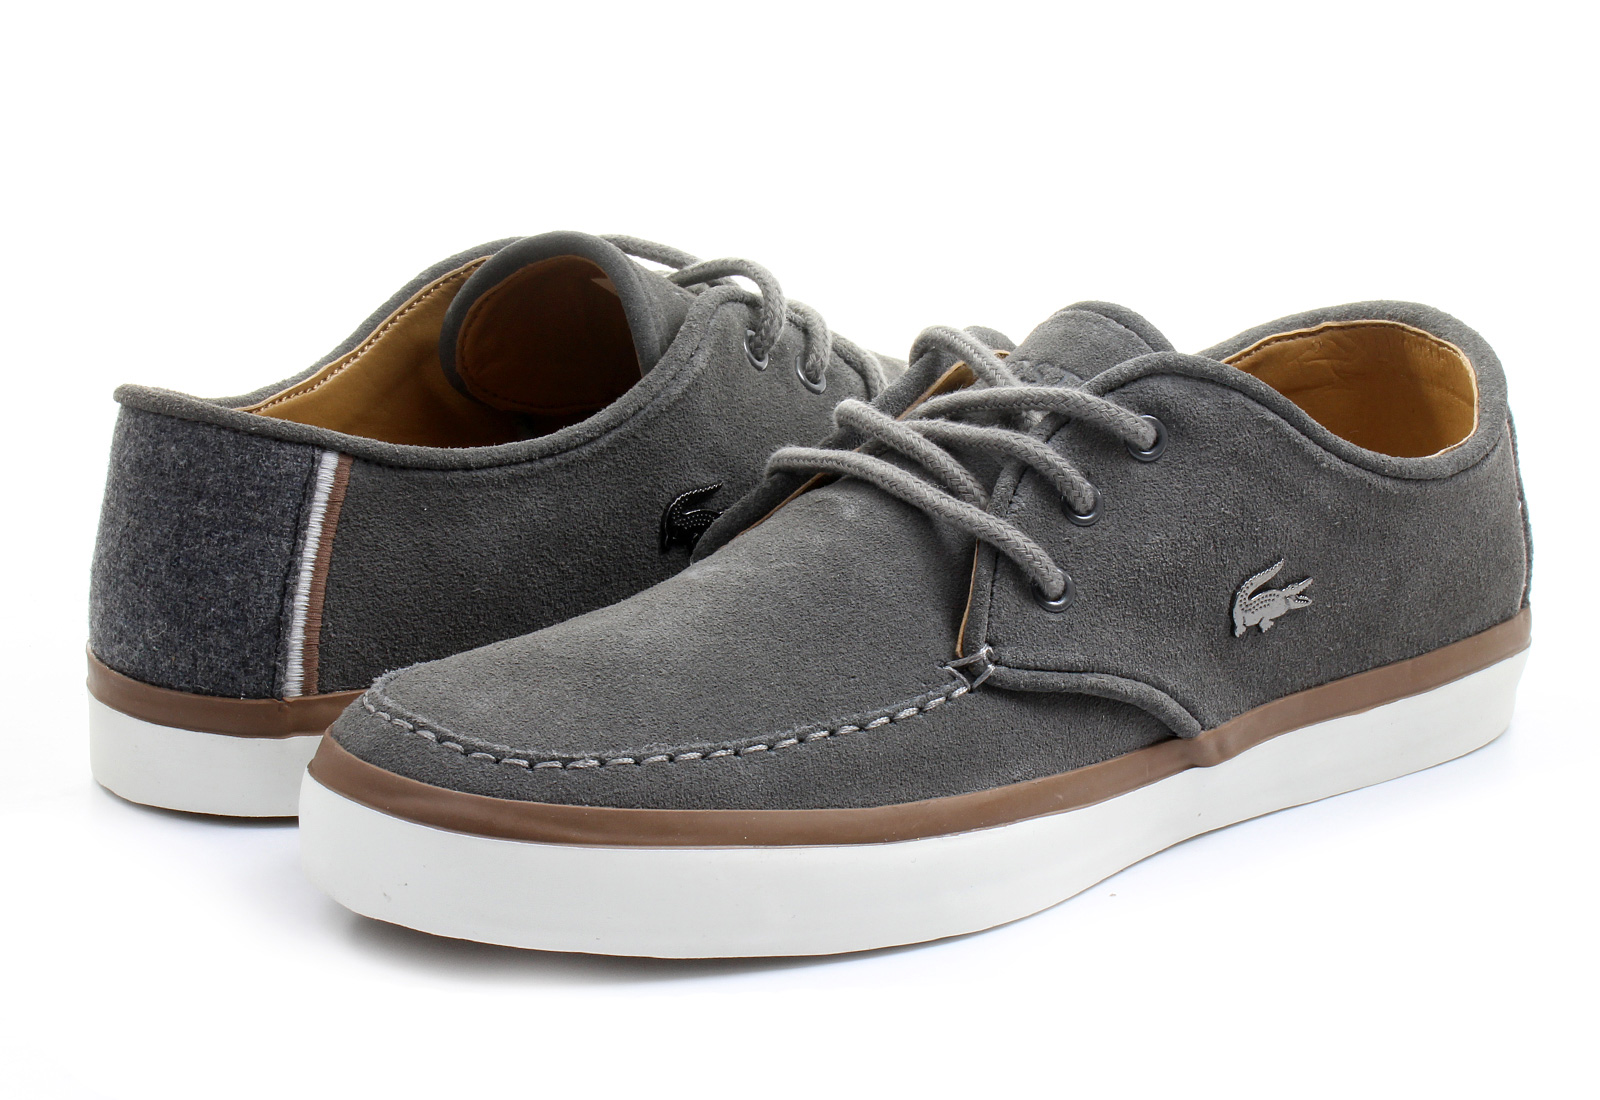 Lacoste Shoes - Sevrin - 151srm2145-007 - Online shop for sneakers ...